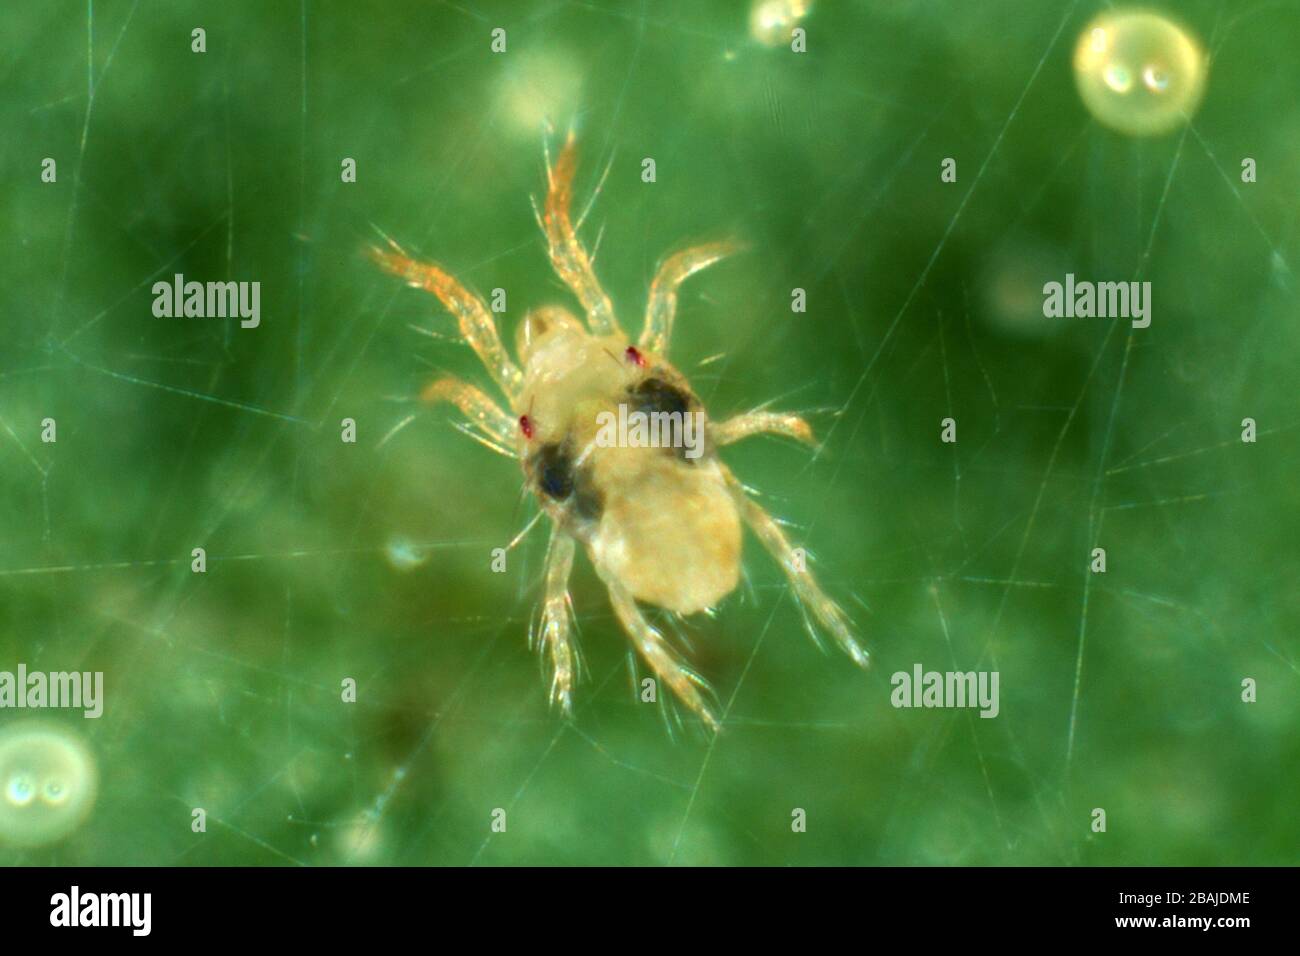 Adult female two spotted or red spider mite (Tetranychus urticae) on a leaf, Devon, September Stock Photo